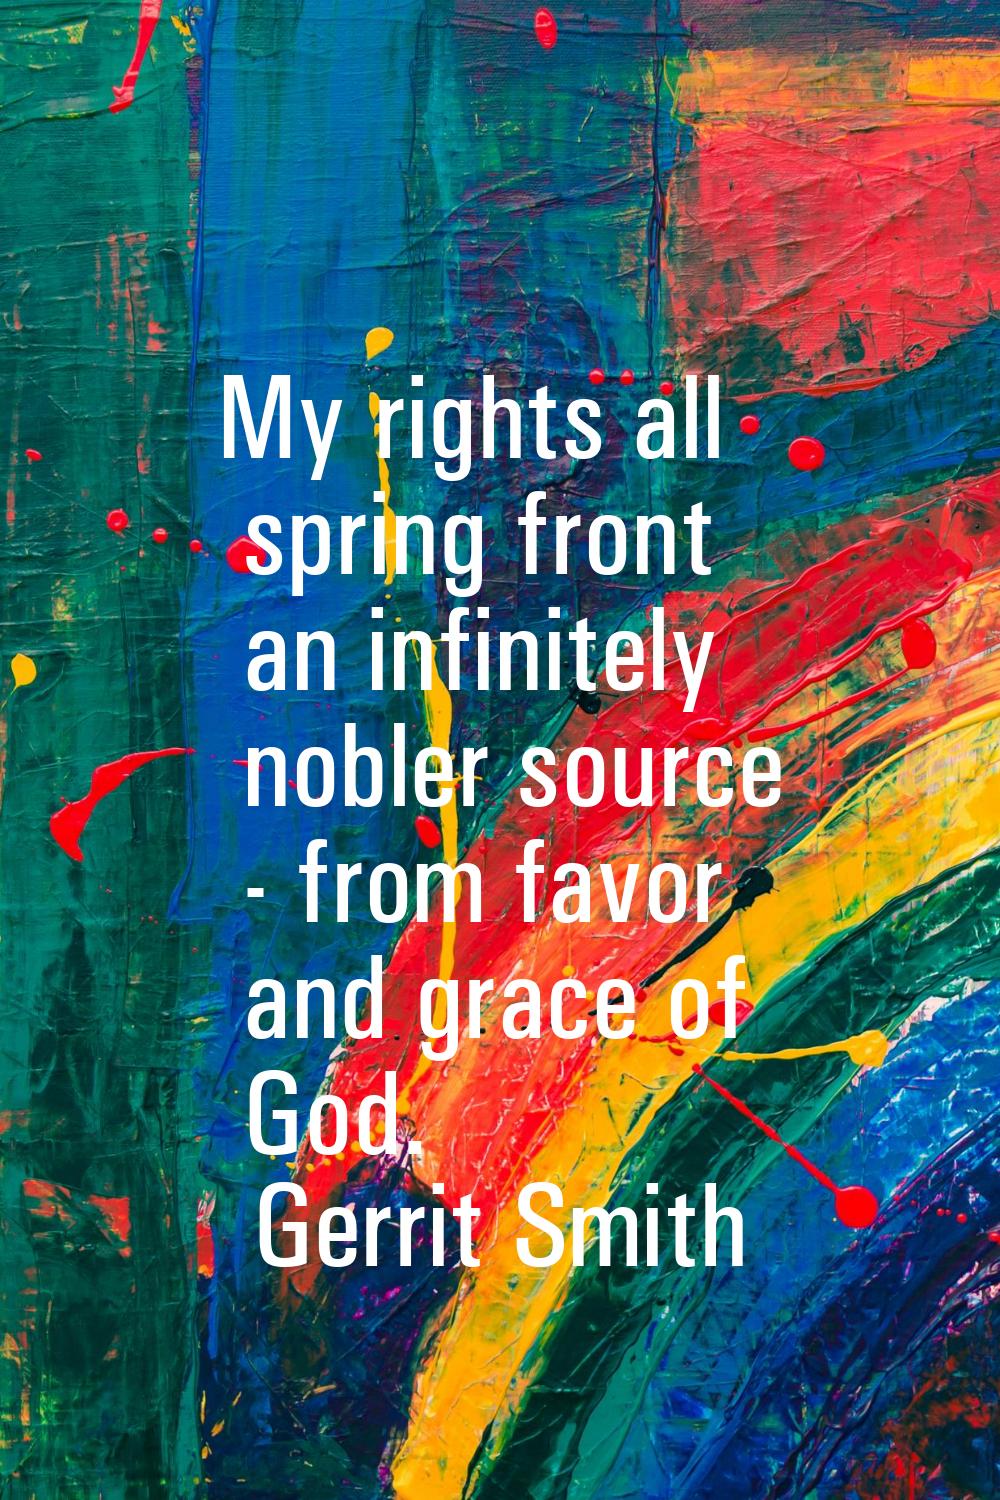 My rights all spring front an infinitely nobler source - from favor and grace of God.